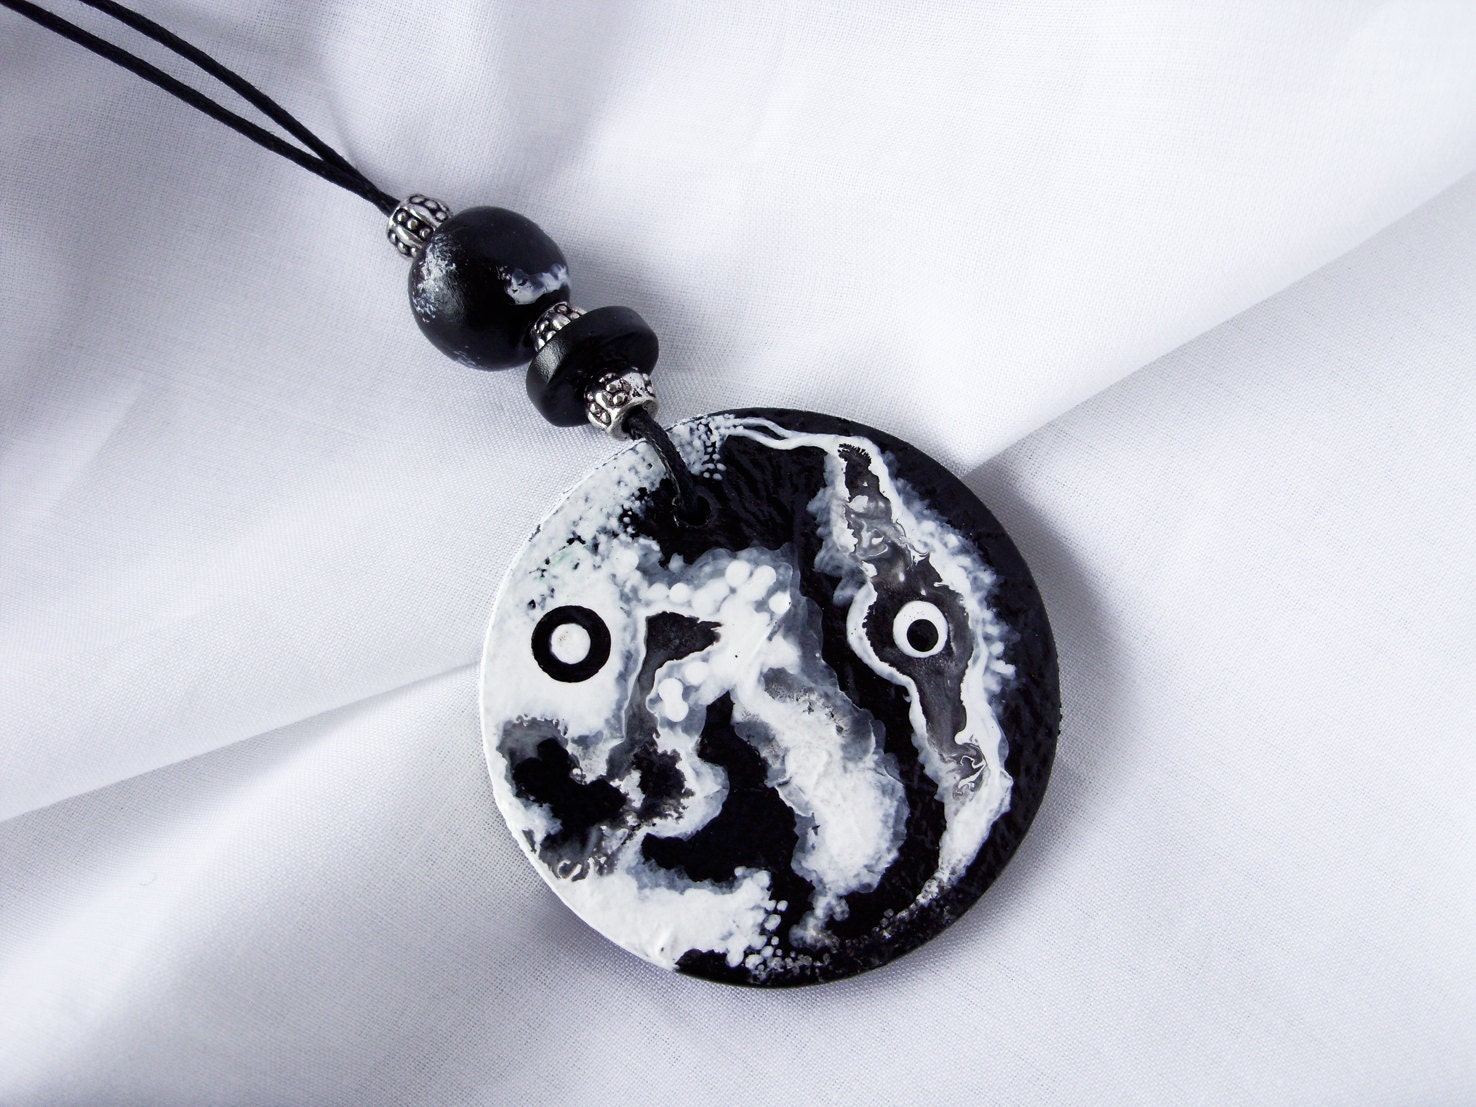 Necklace -  Black and white Wooden Pendant - modern Wearable Art - OOAK -